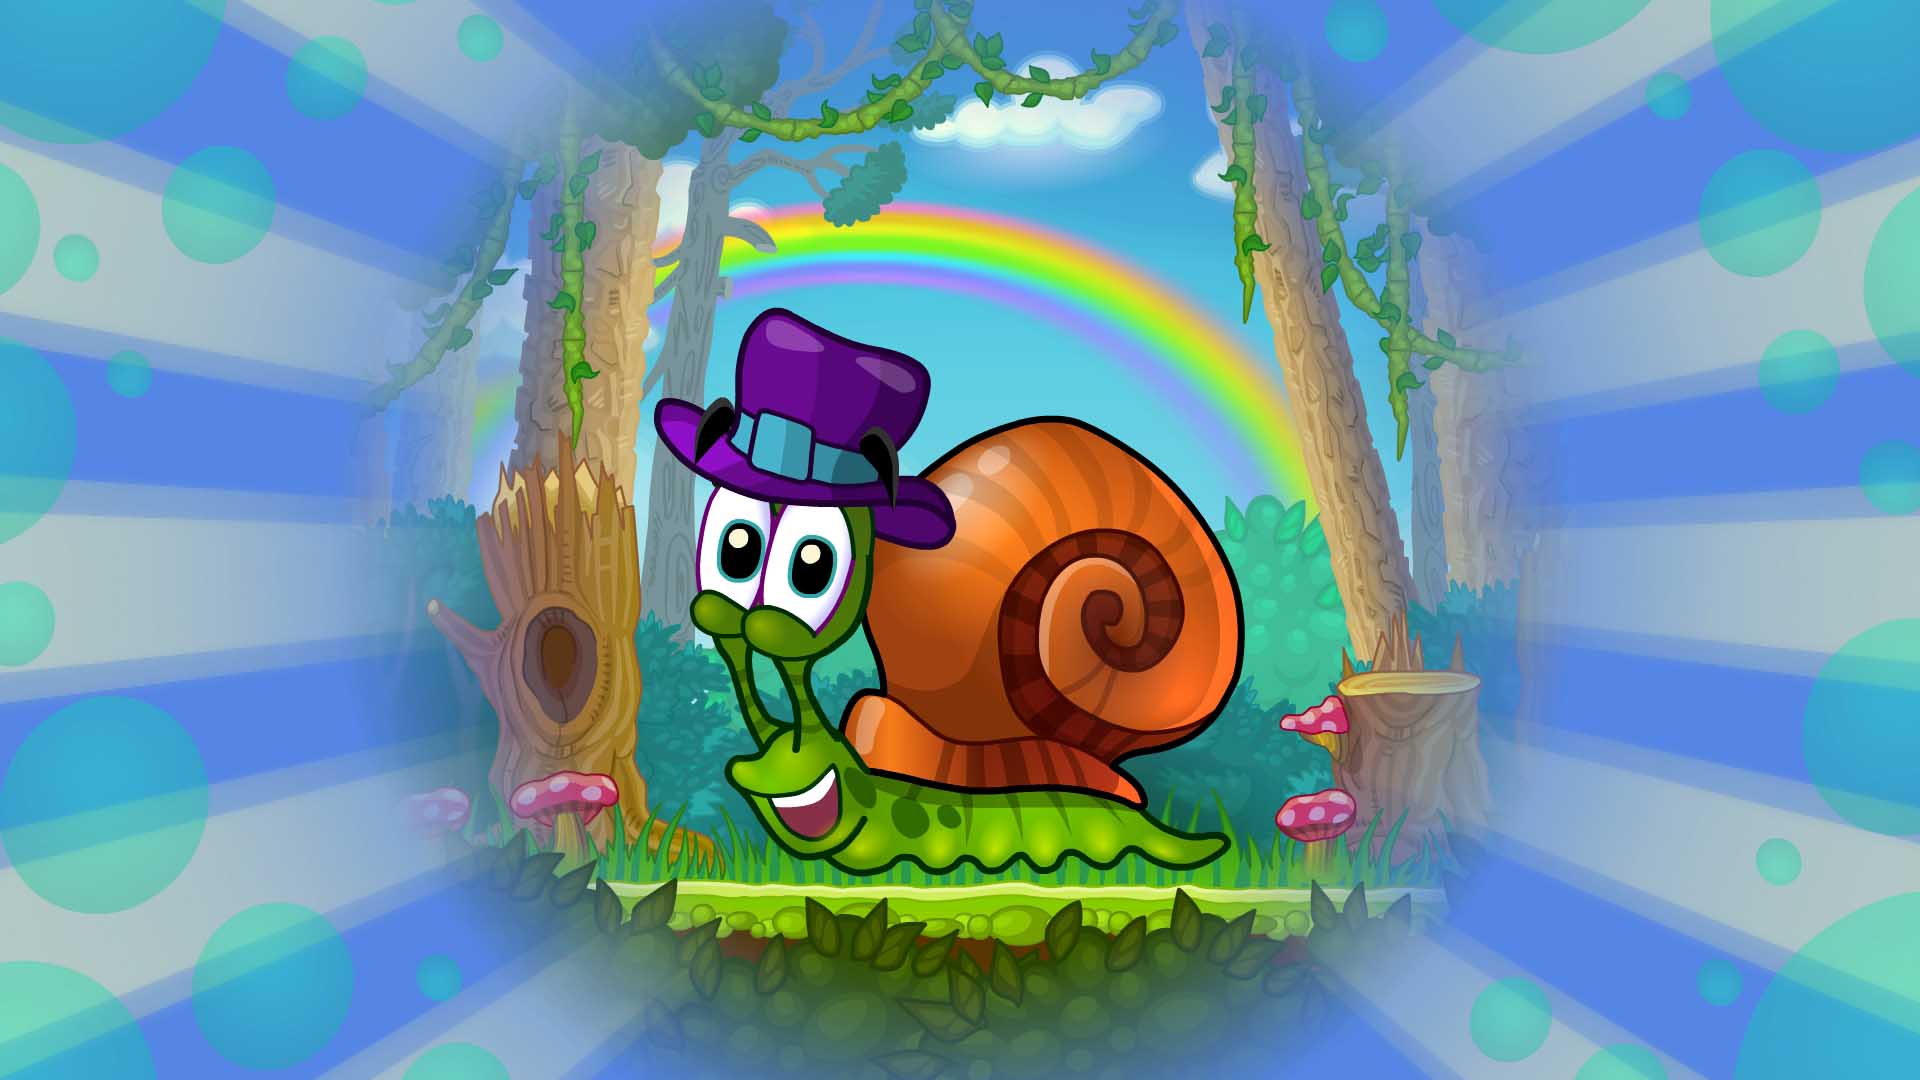 Улитка боб русский язык. Snail Bob 2 (улитка Боб 2). Игры улитки Боба игры улитки Боба. Игра улитка Боб 1. Снаил Боб.